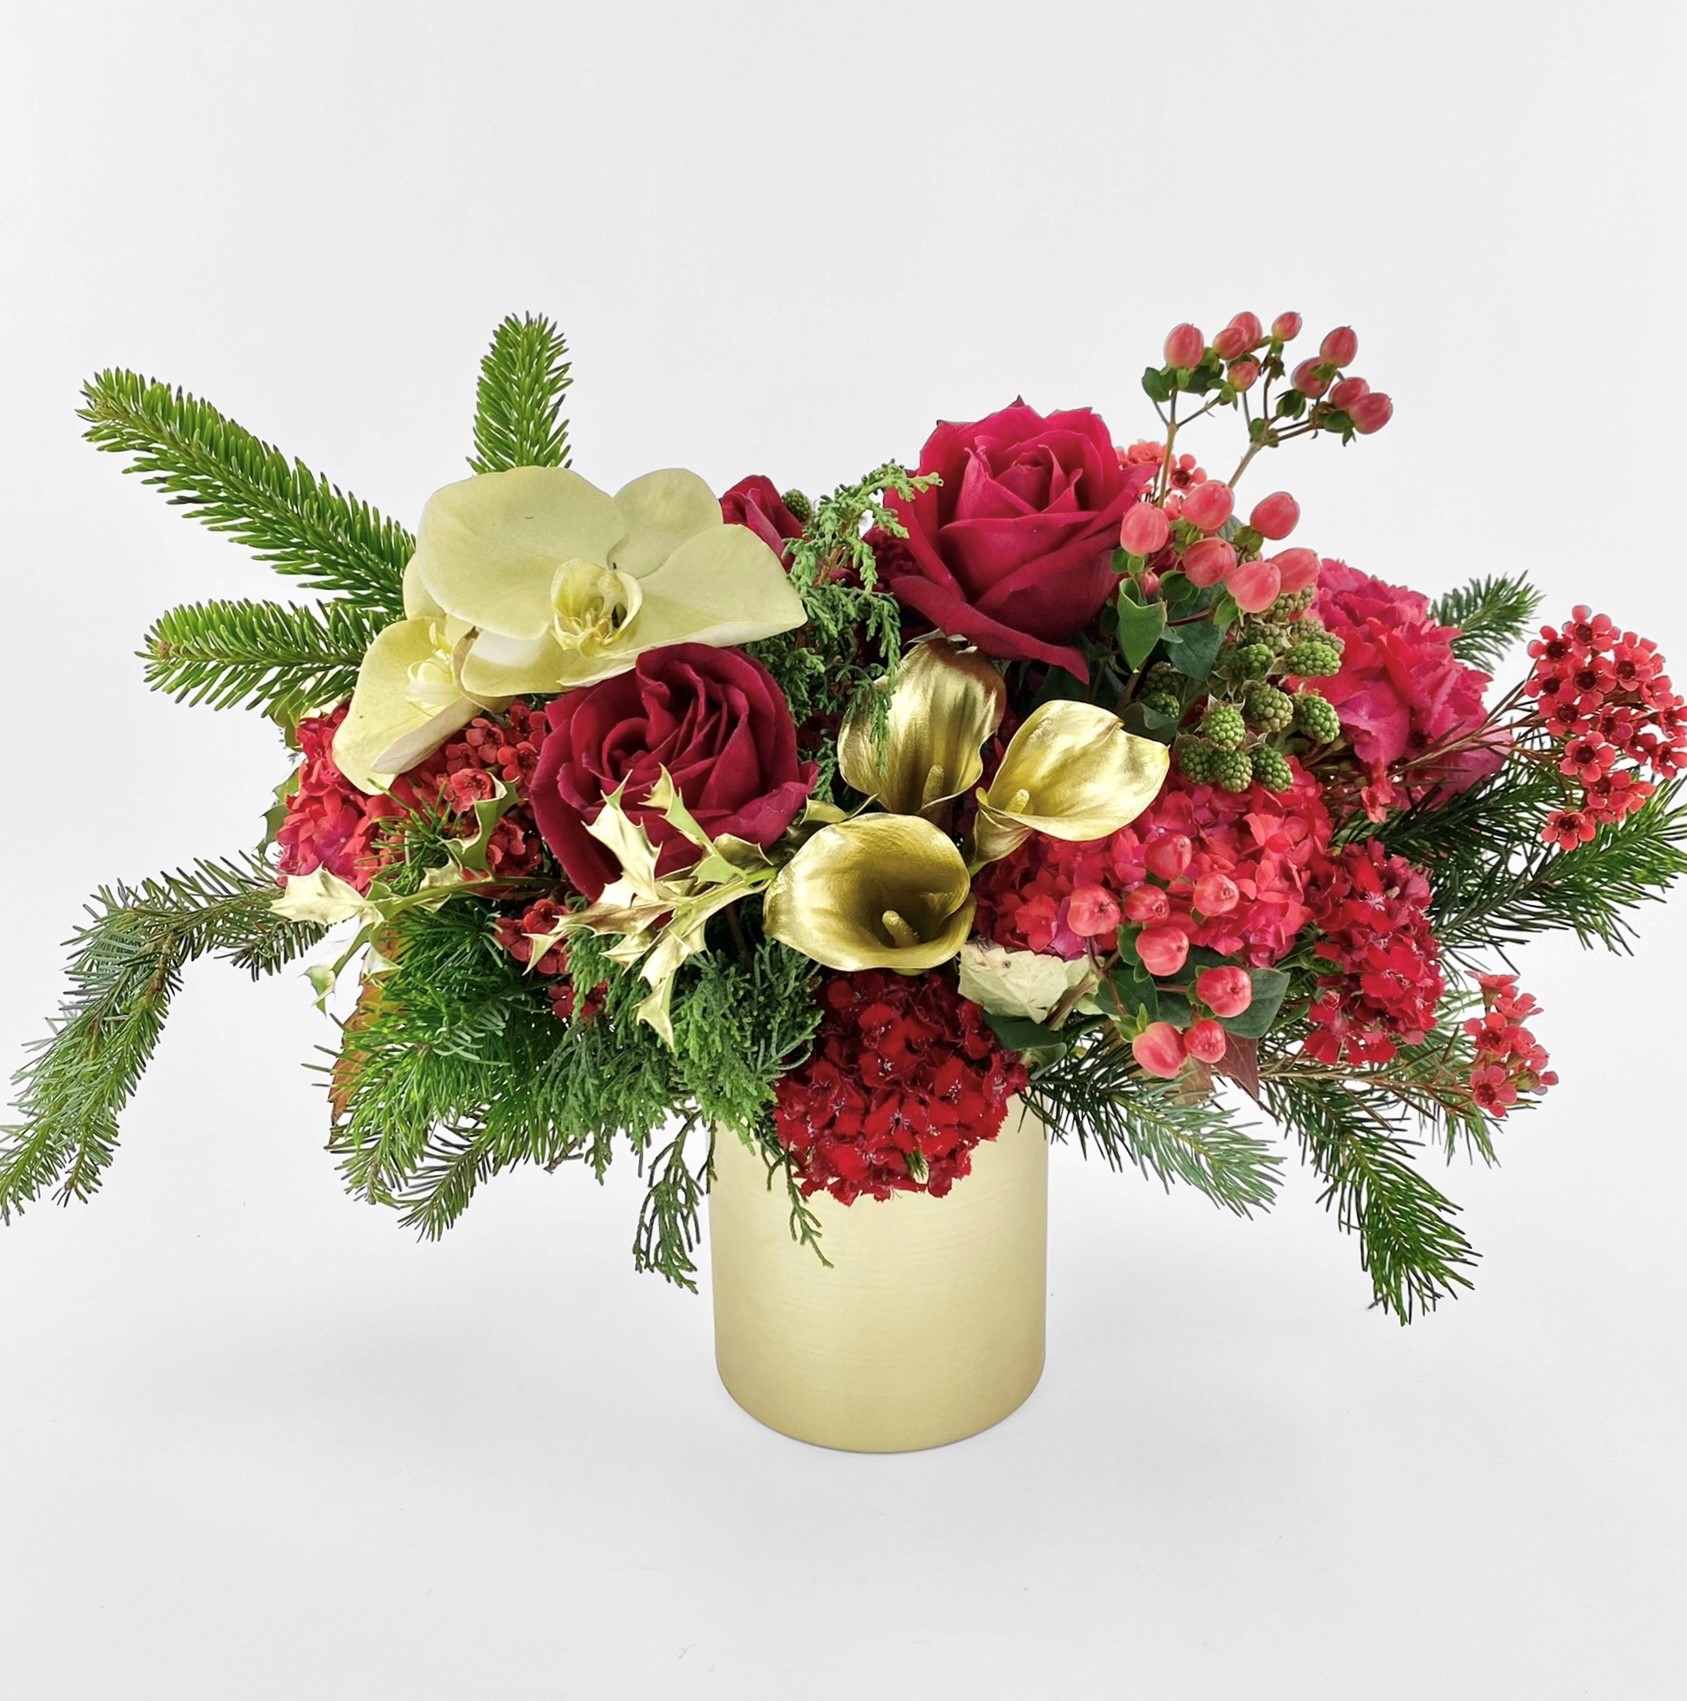 Gold pot Christmas centrepiece arrangement, red roses, Hypericum berry, hydranges and gold sprayed phalaenopsis orchids, calla lily and seasonal red flowers accented with fragrant pine leaves.